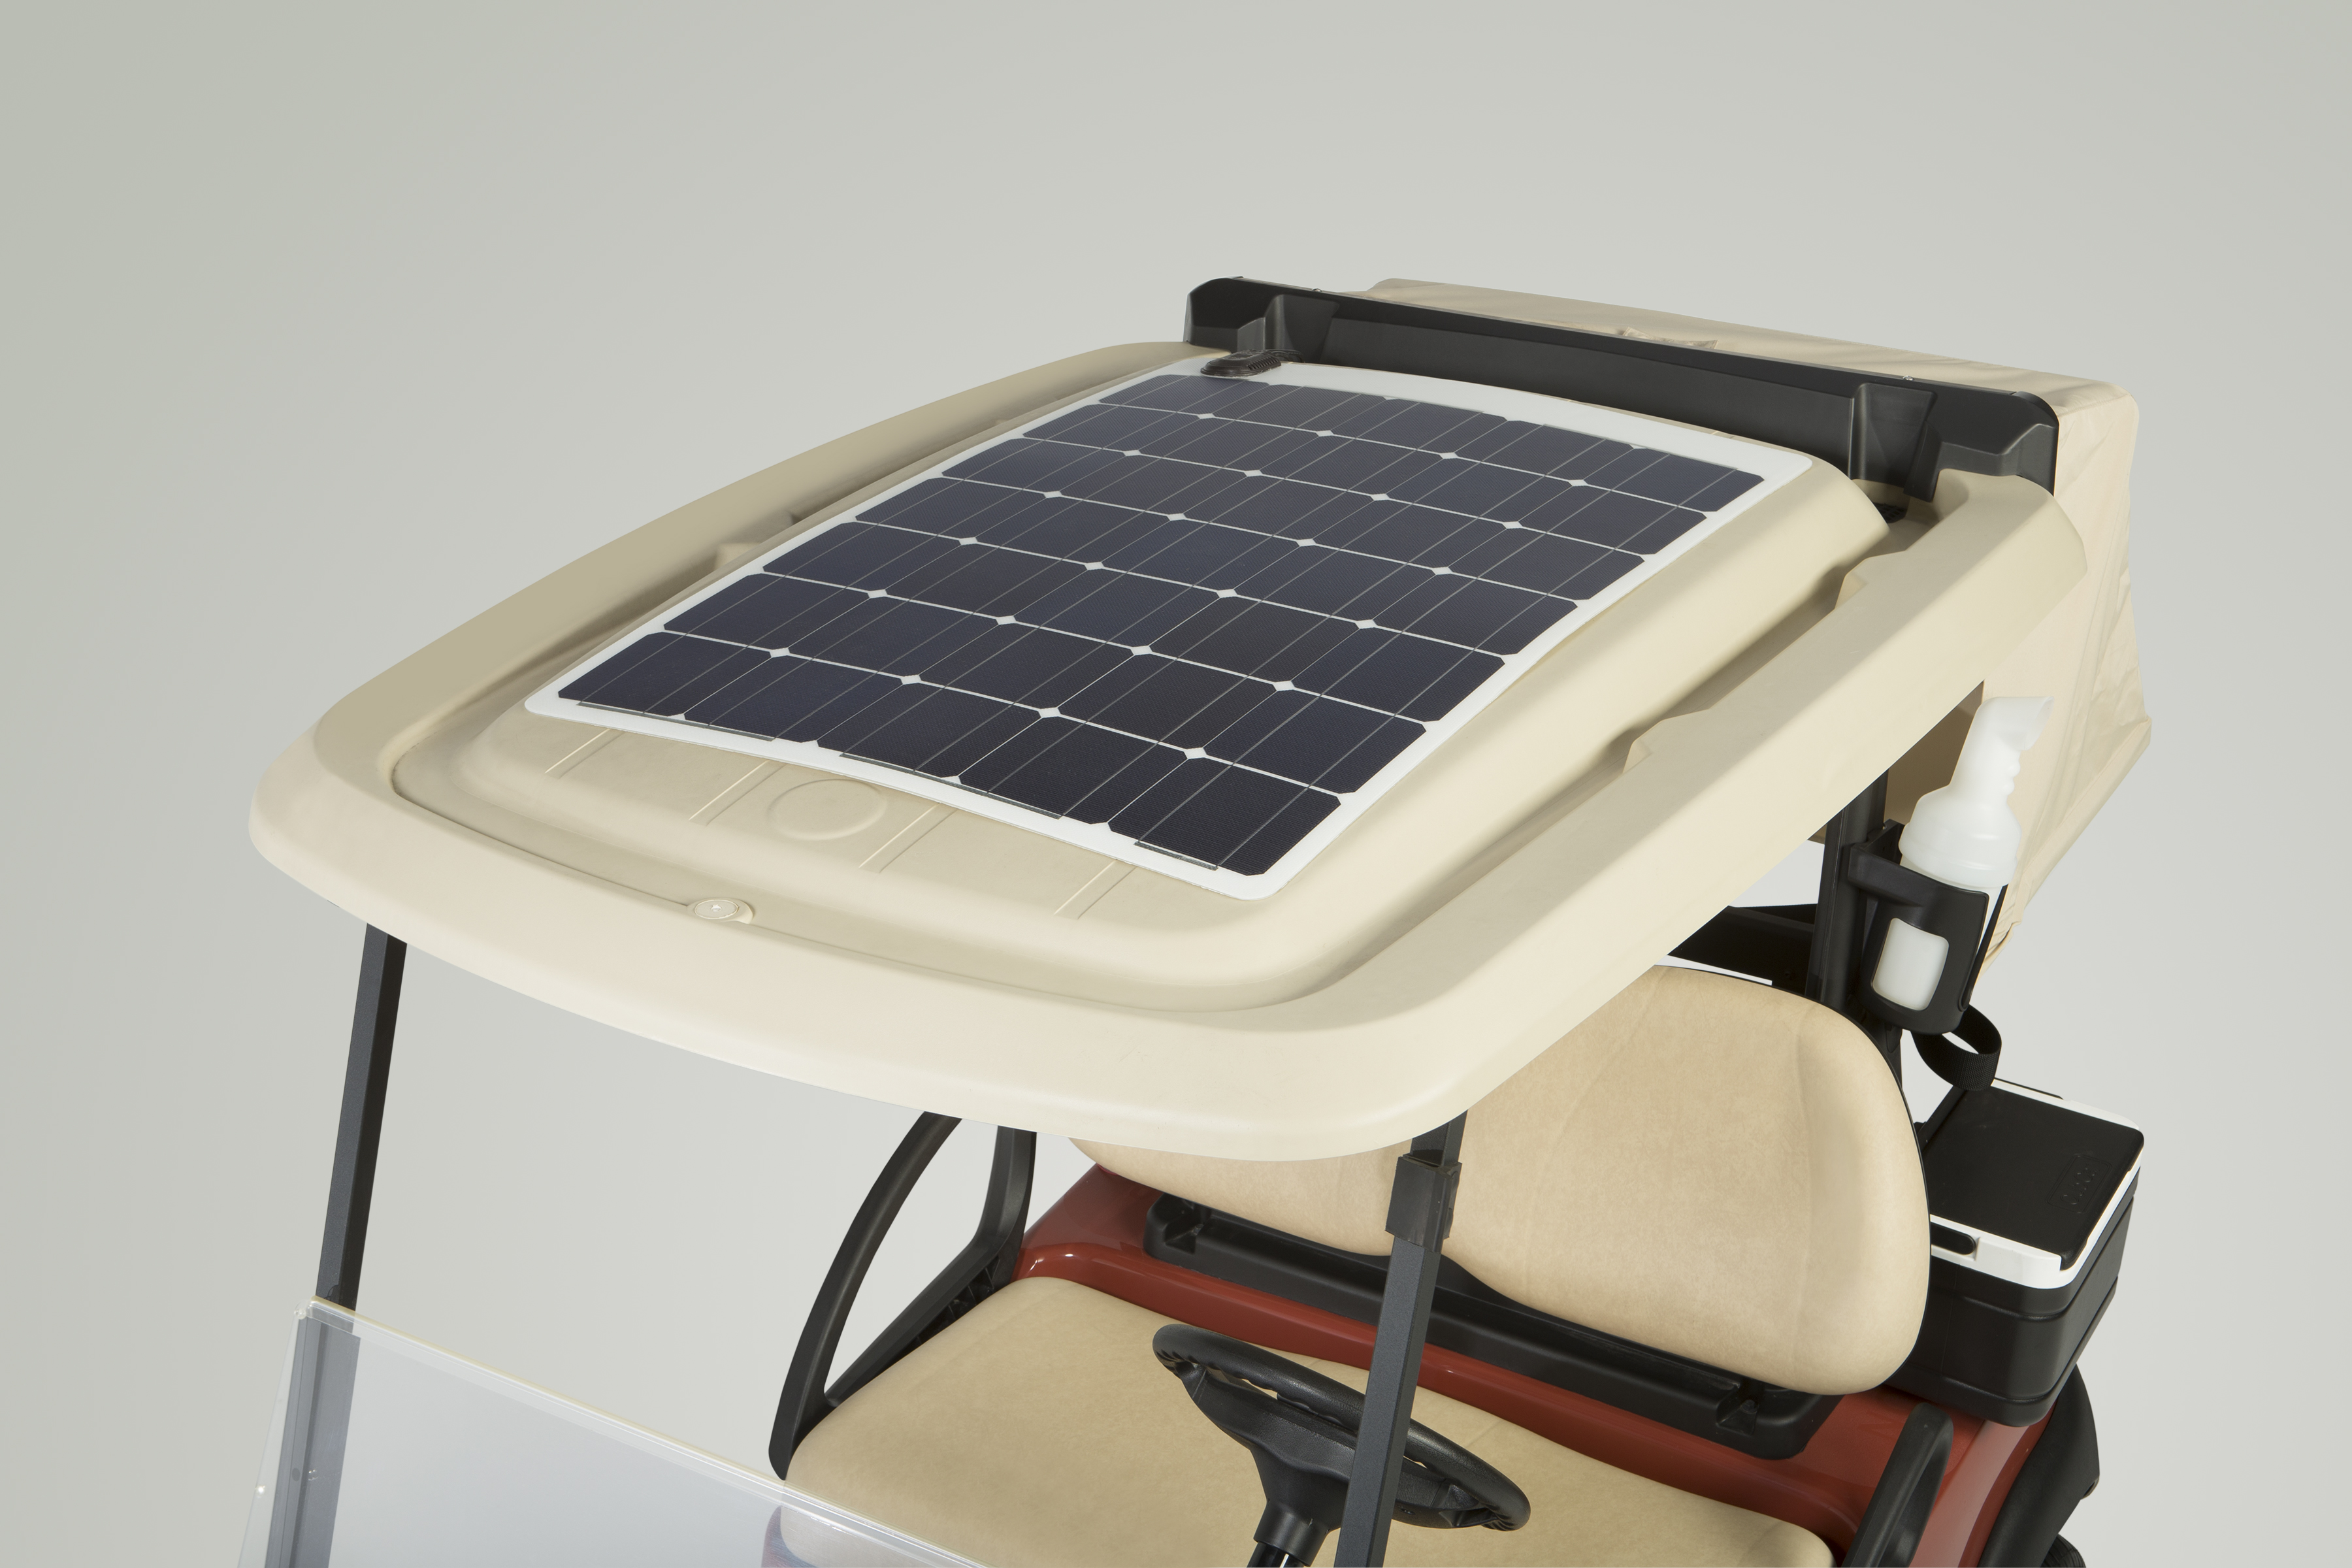 The new solar drive charging panels decrease grid charging and increase range of the vehicles.